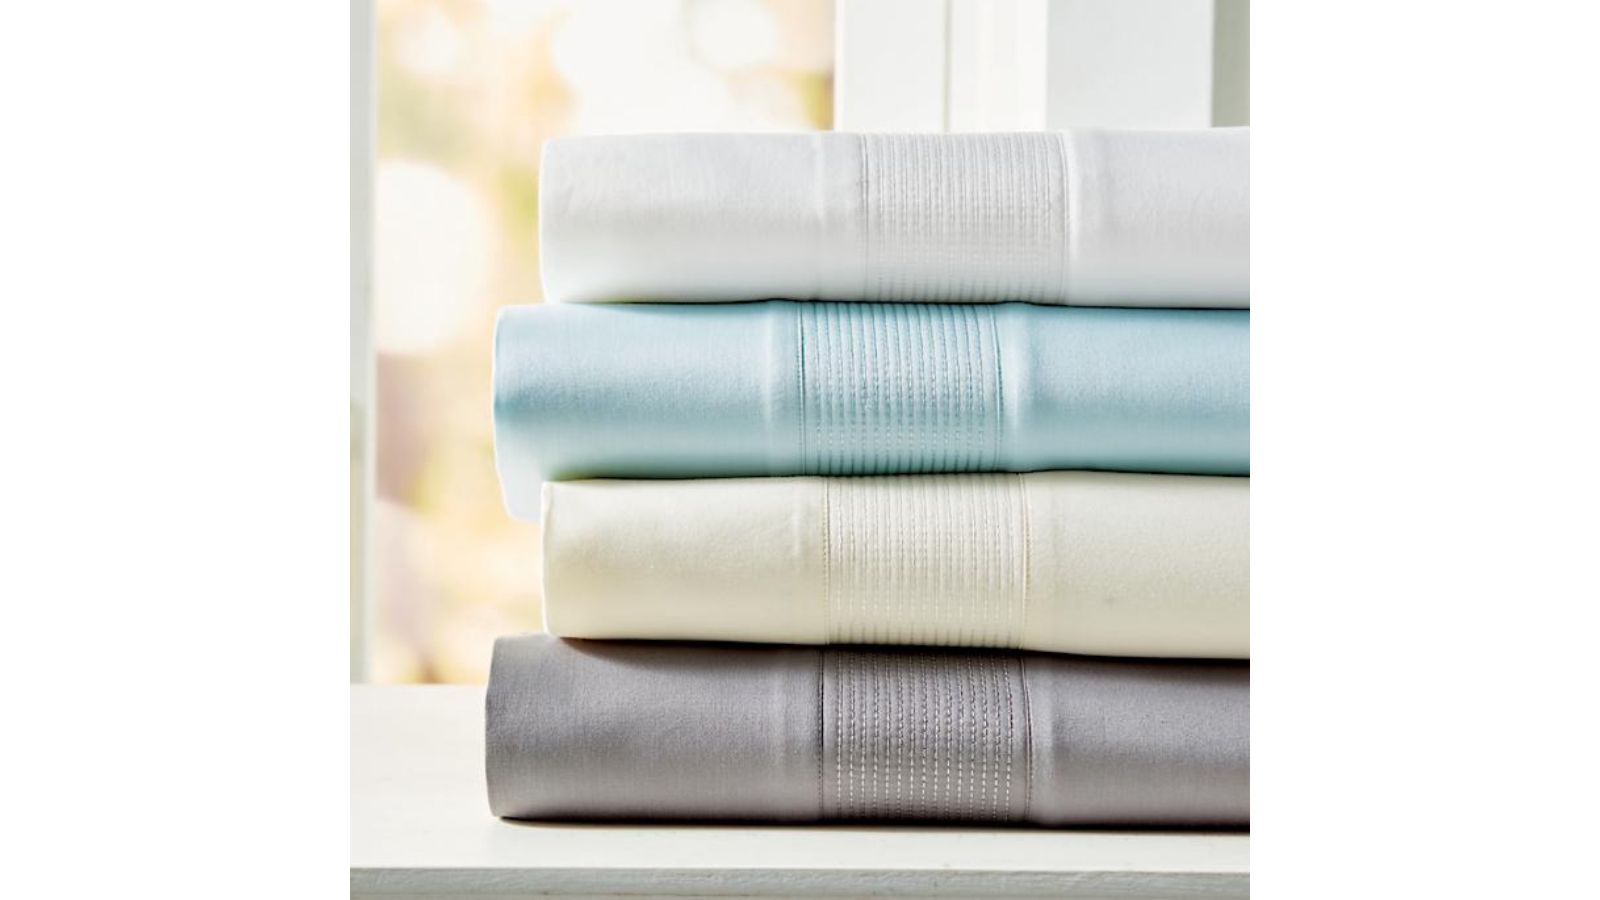 Frontgate Outlet - New Resort Towels added to the Frontgate Essential Shop!  Terracotta, Green Clay, and Indigo are now available in store 10% off  everyday! #FrontgateOutletGA